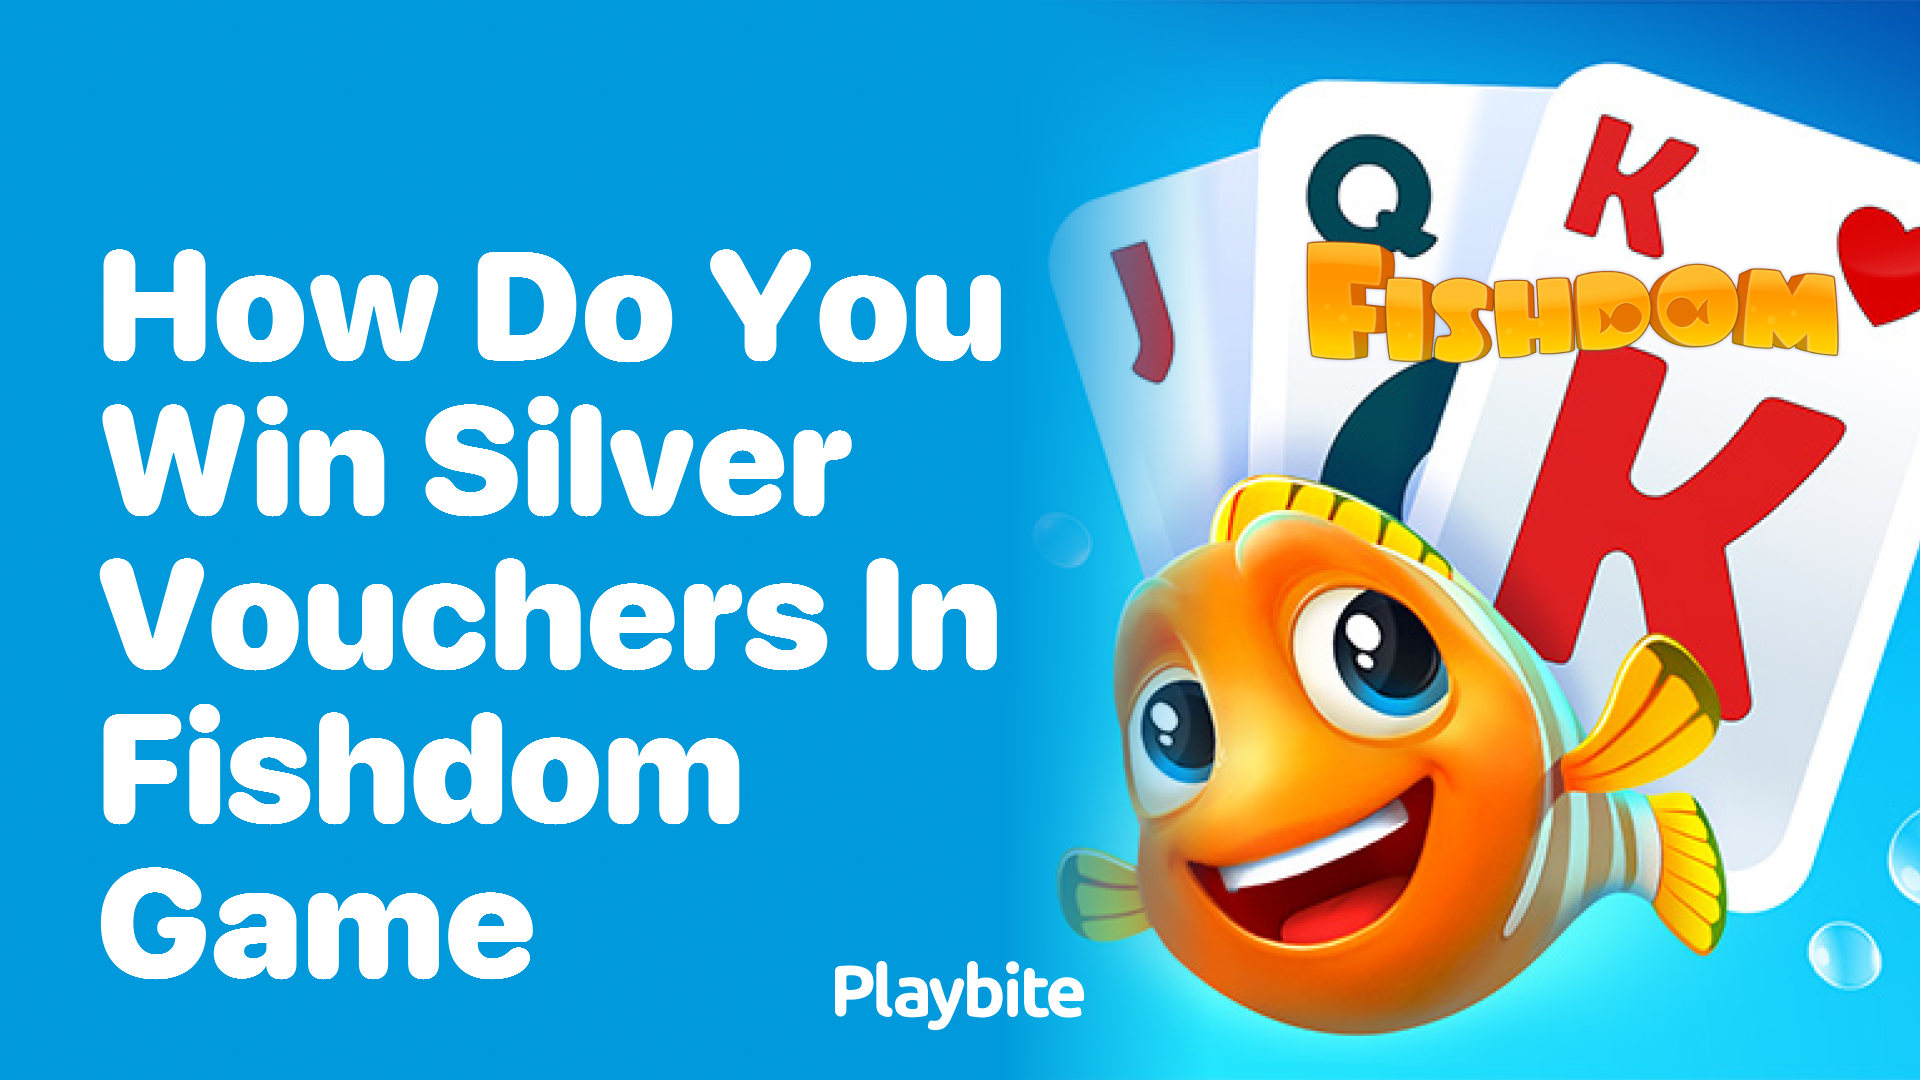 How Do You Win Silver Vouchers in Fishdom Game?